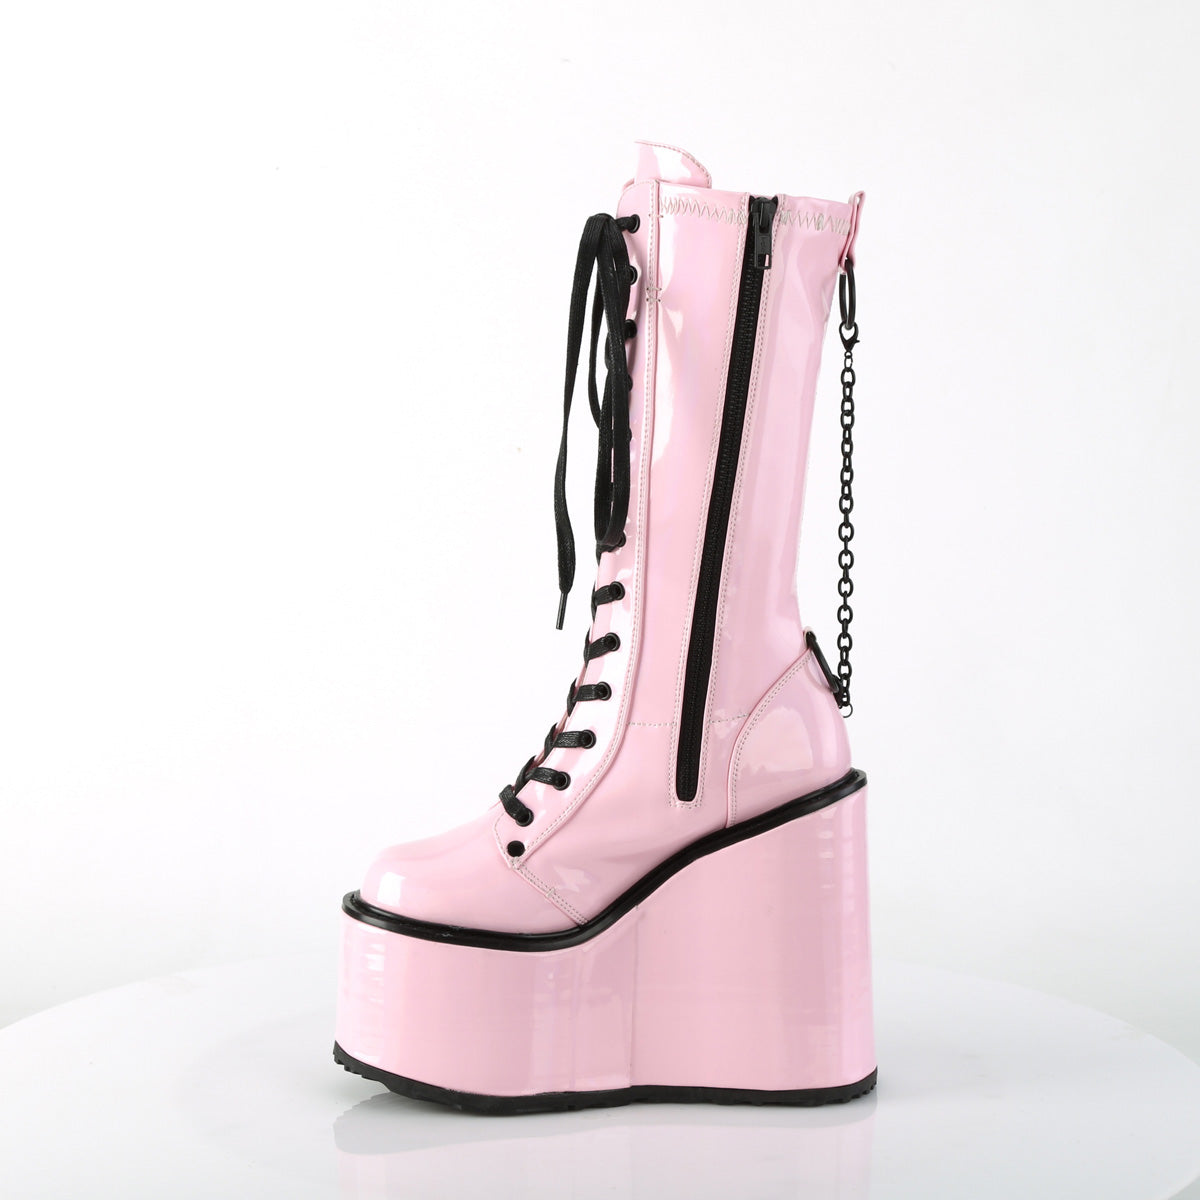 SWING-150 Demonia B Pink Holographic Stretch Patent Women's Mid-Calf & Knee High Boots [Alternative Footwear]